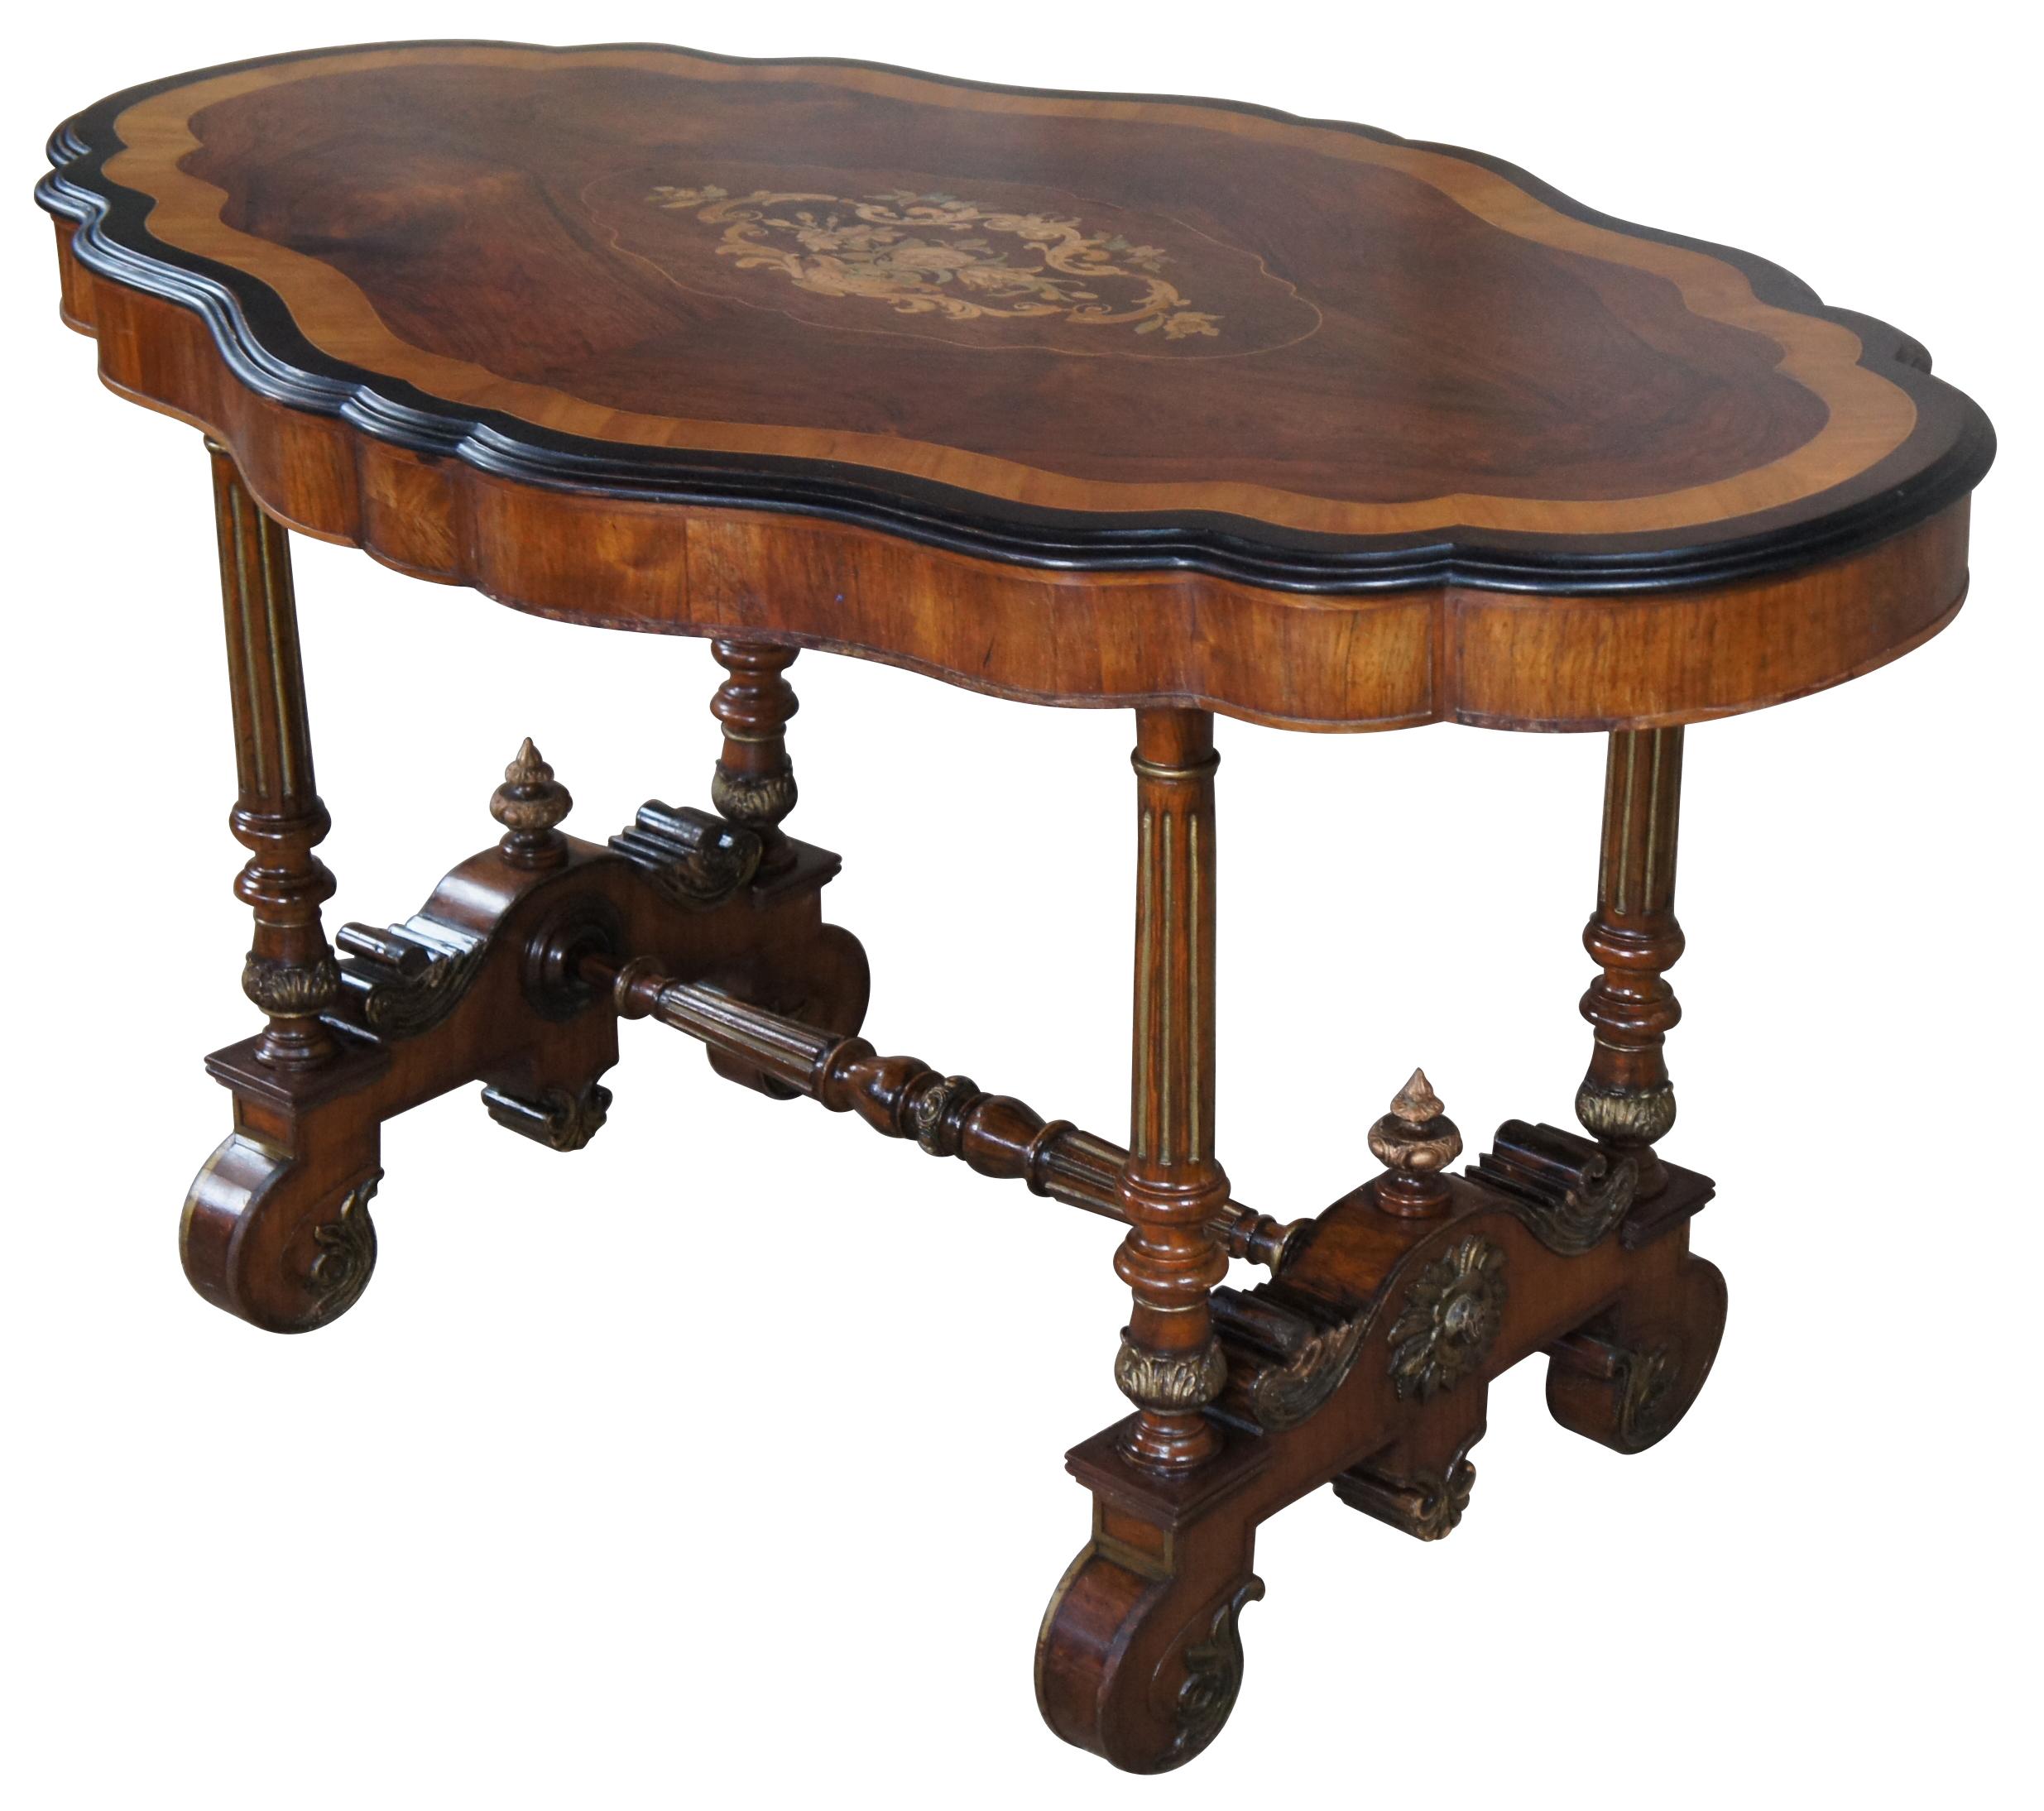 Antique American Renaissance Revival Serpentine Walnut Marquetry Center Table In Good Condition For Sale In Dayton, OH